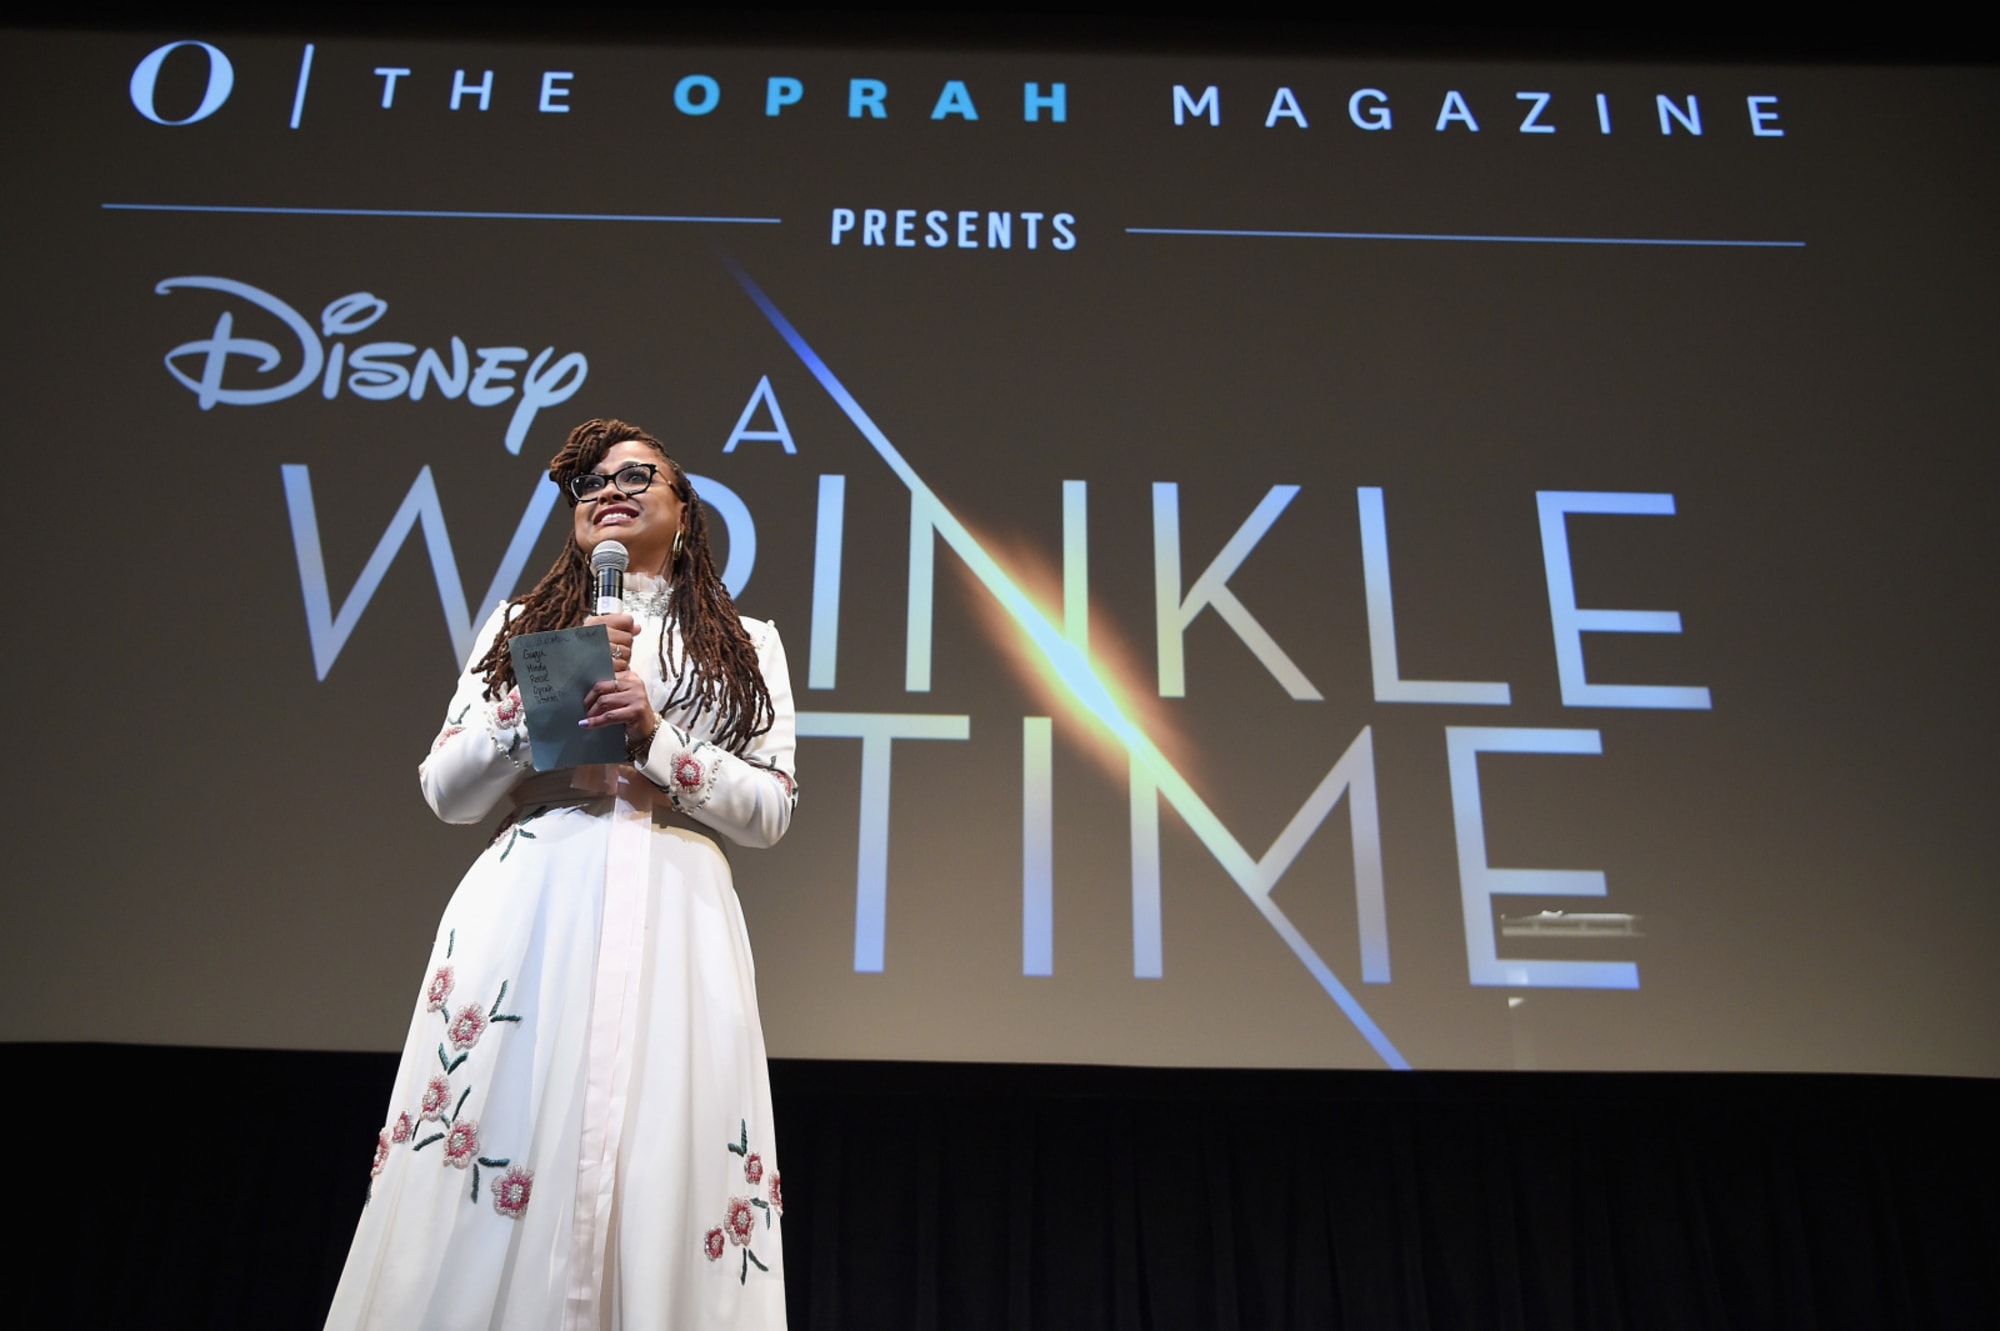 New on Netflix Disney's A Wrinkle in Time is now streaming